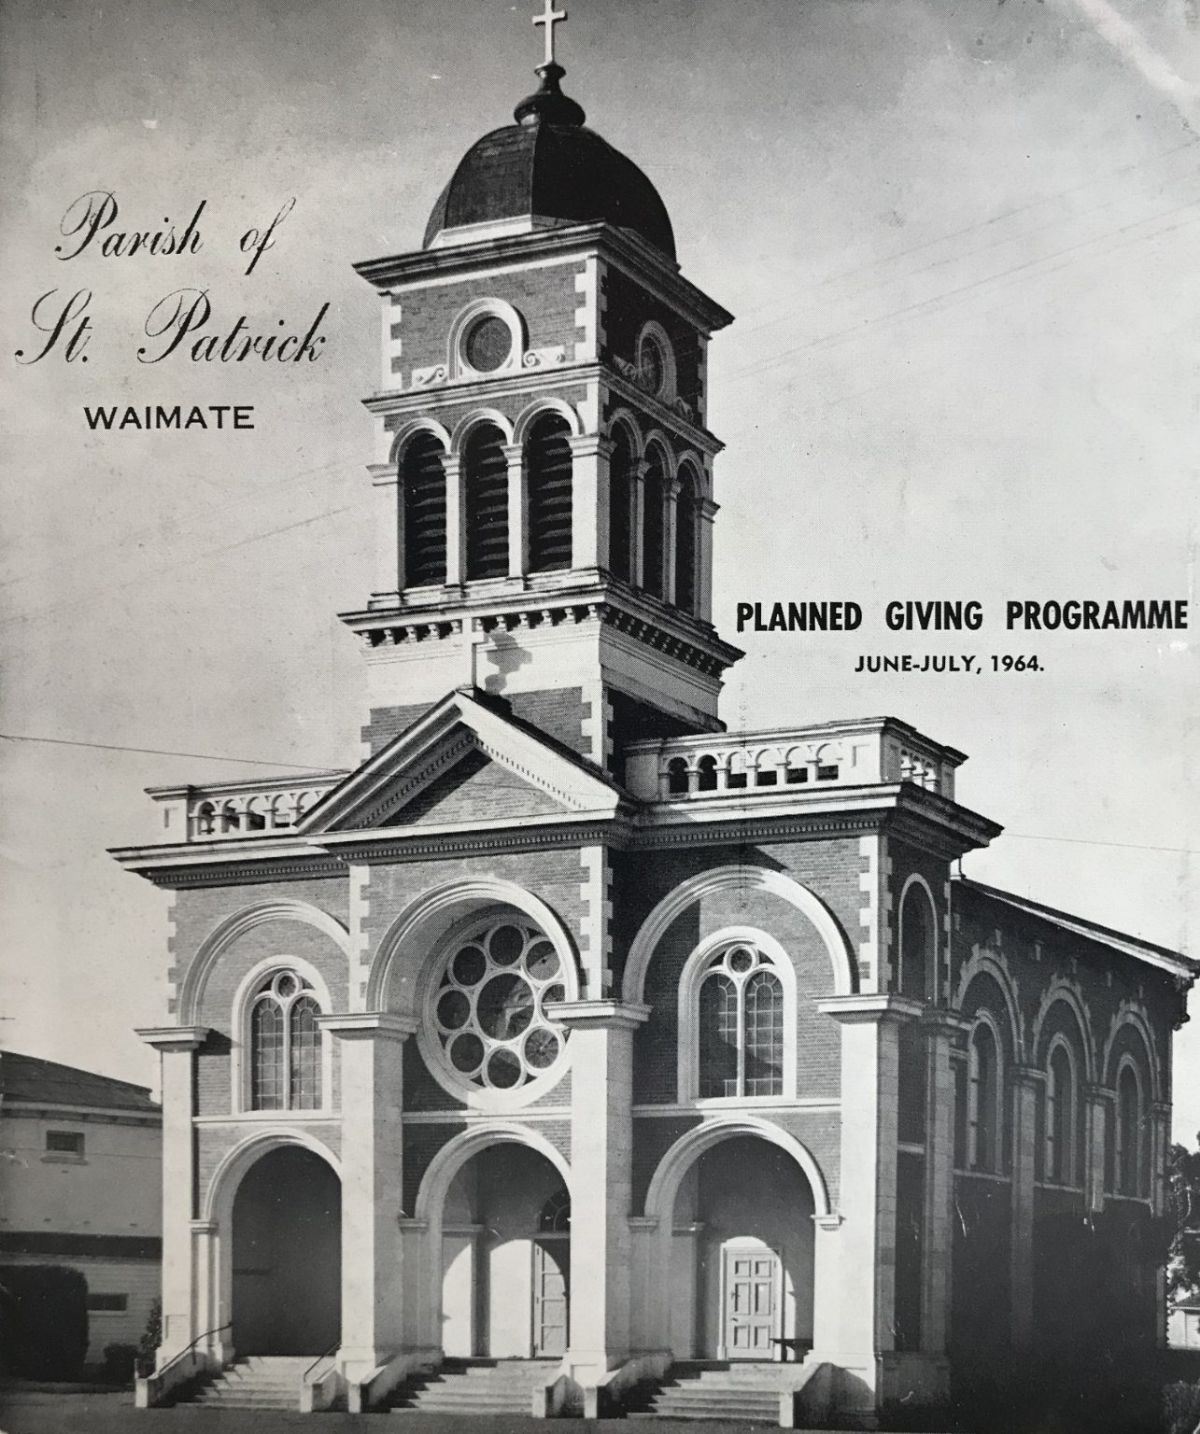 PARISH OF ST. PATRICK WAIMATE: Planned Giving Programme, June - July 1964